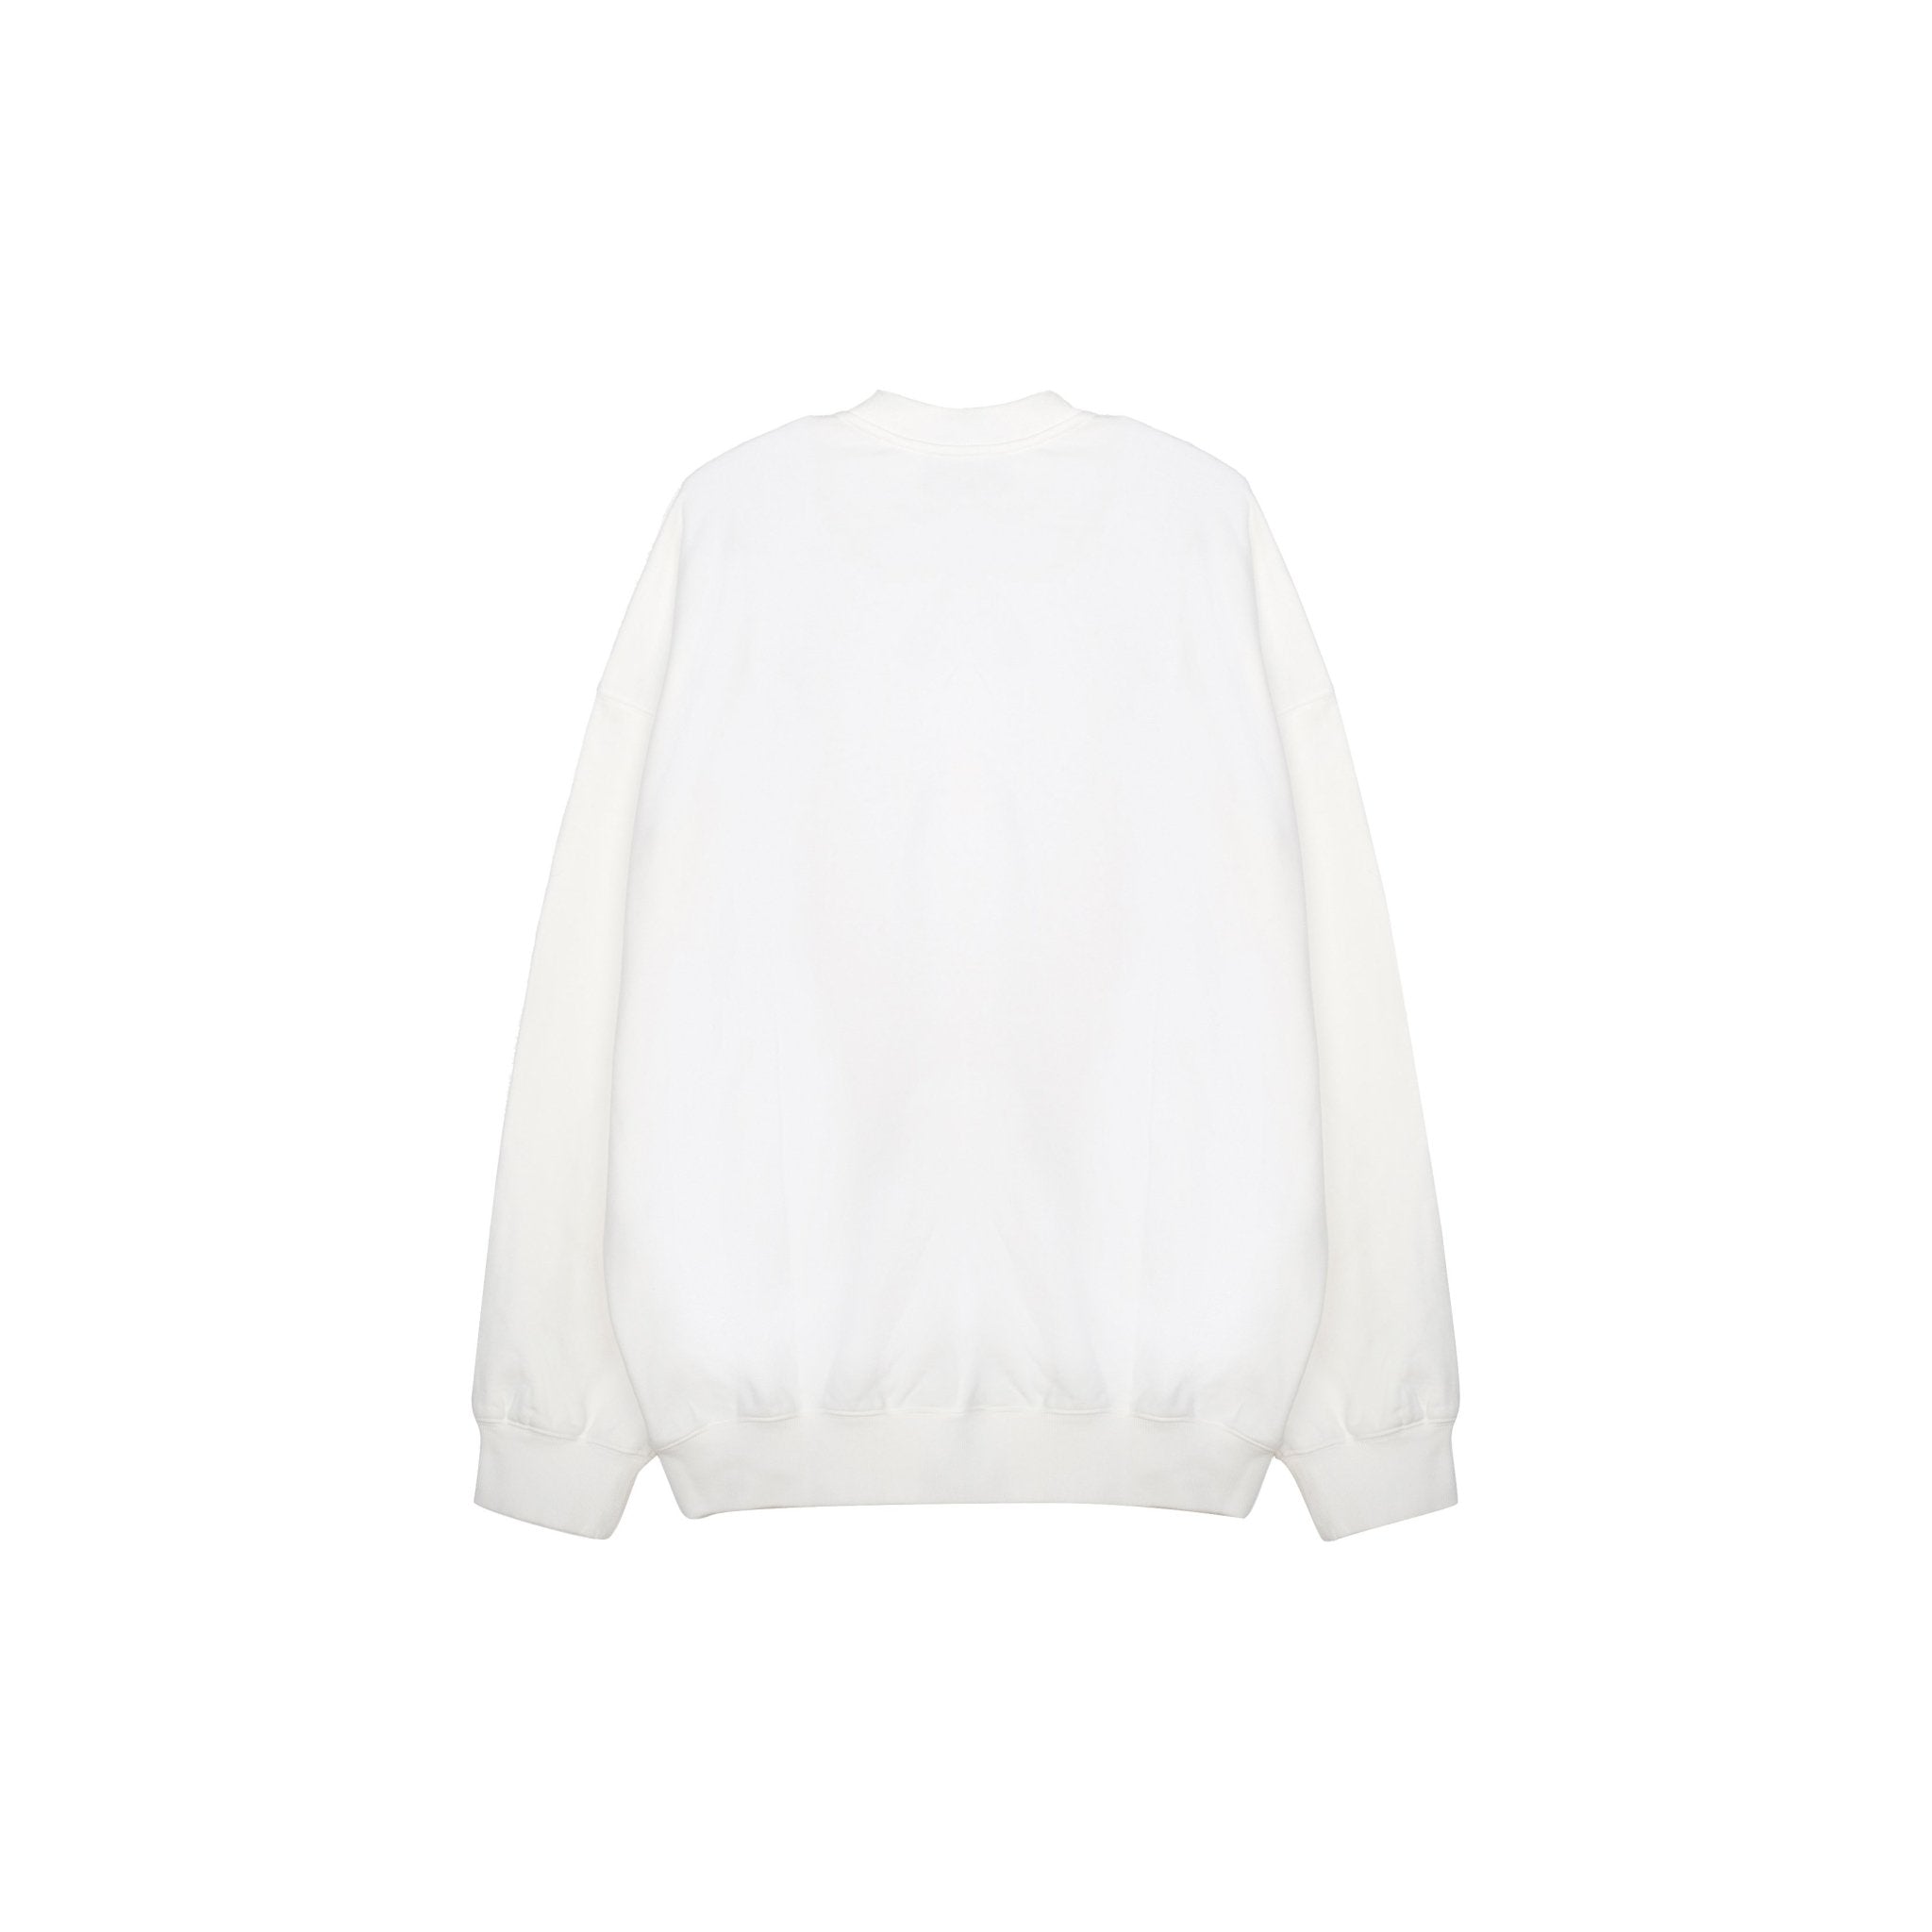 ANN ANDELMAN White Smiley Face Sweater | MADA IN CHINA